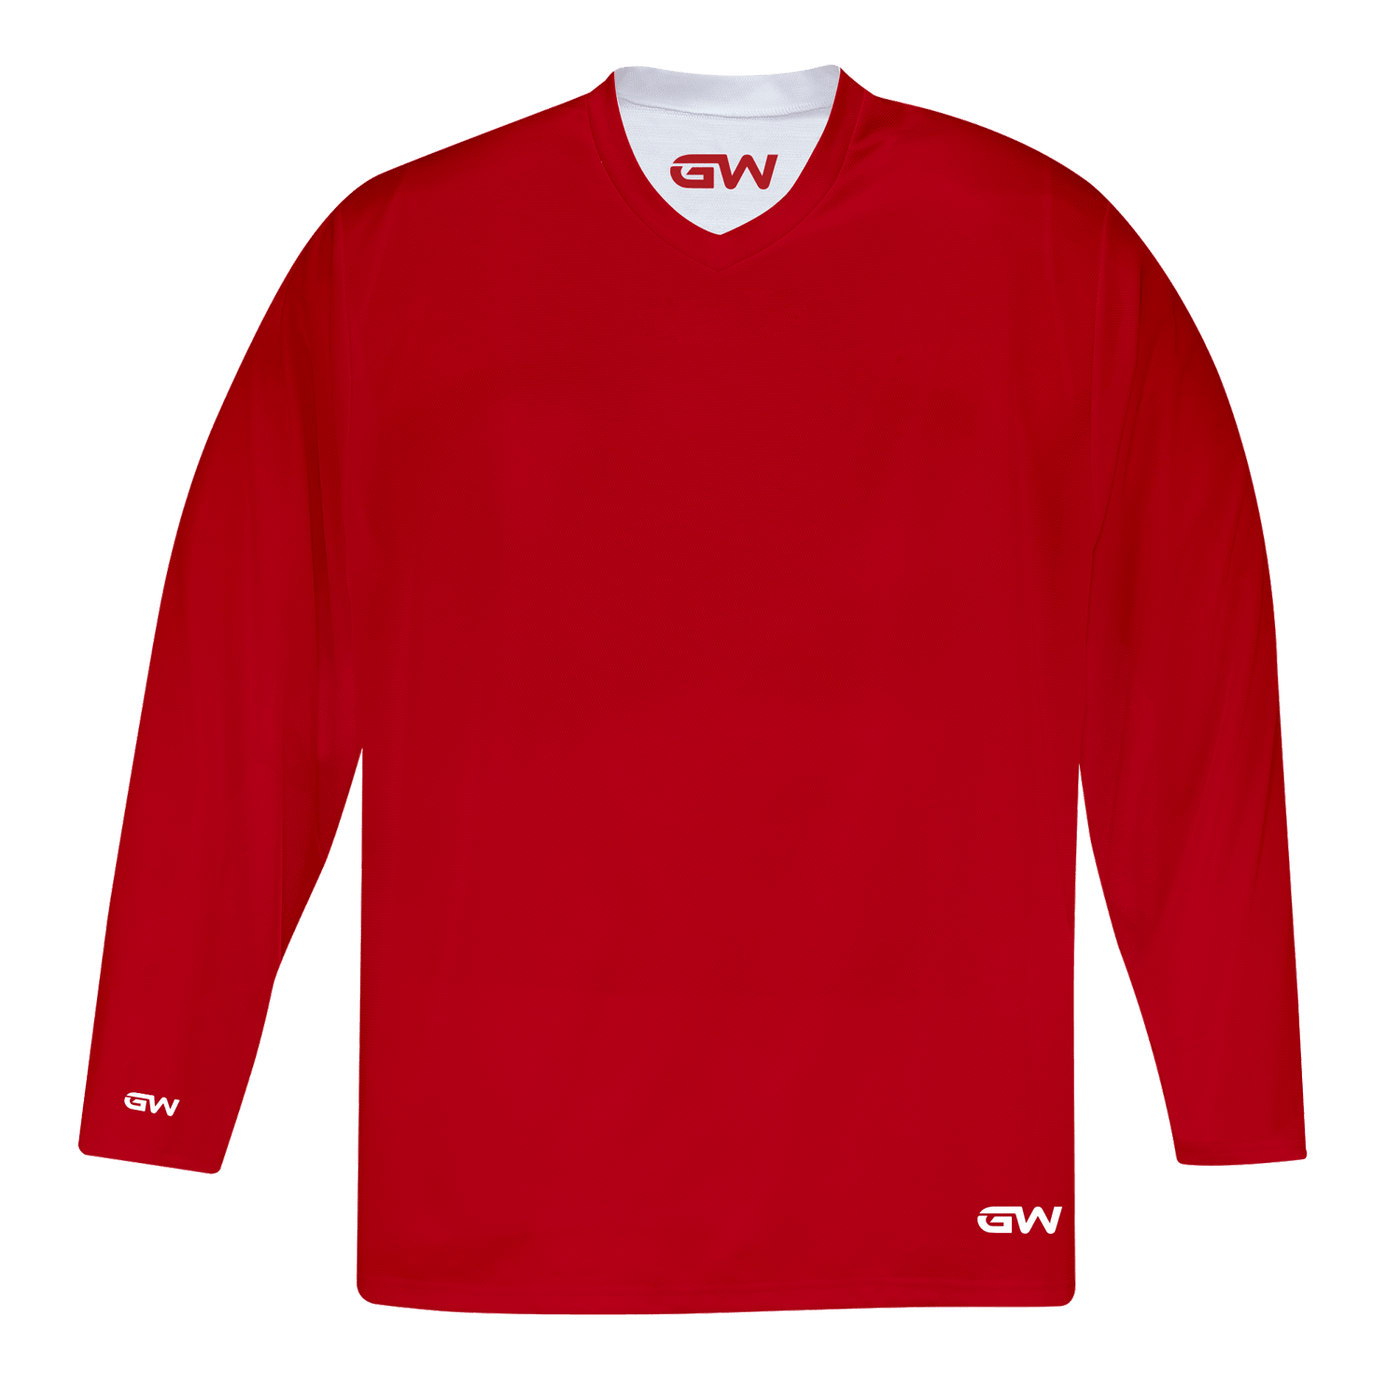 GameWear GW7500 ProLite Series Reversible Junior Hockey Practice Jersey - Red / White - The Hockey Shop Source For Sports